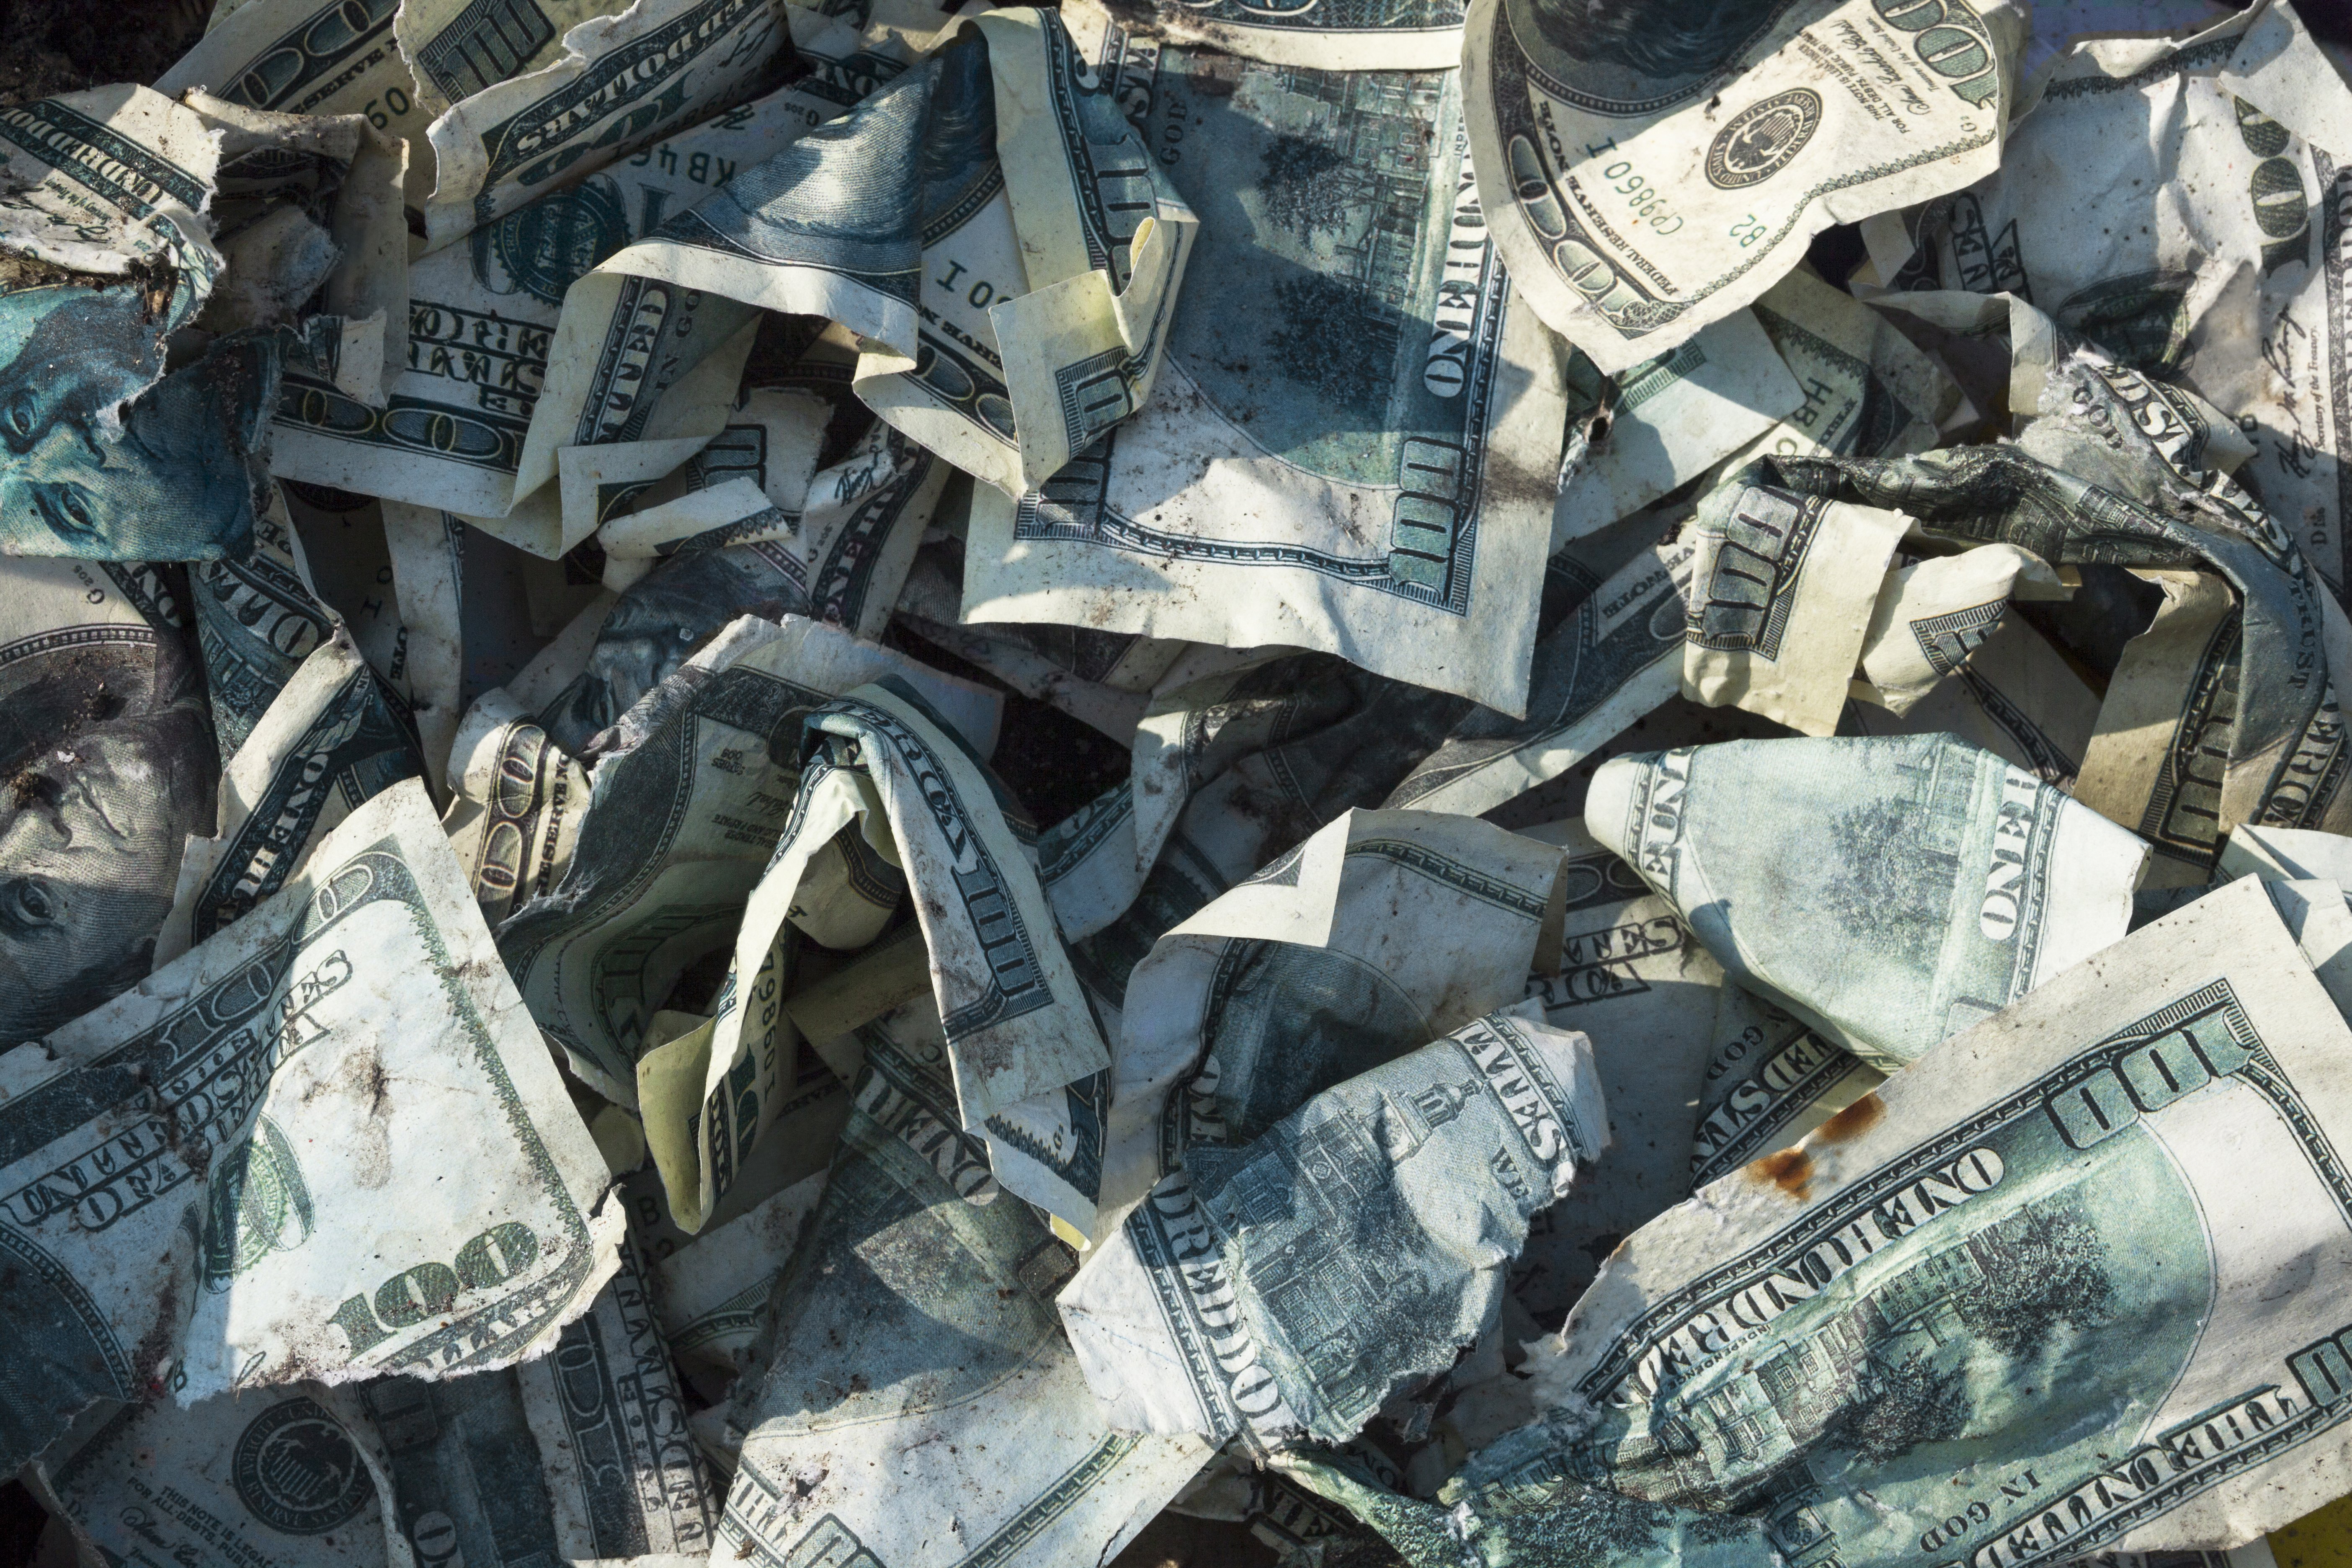 A large number of bills | Photo: Shutterstock